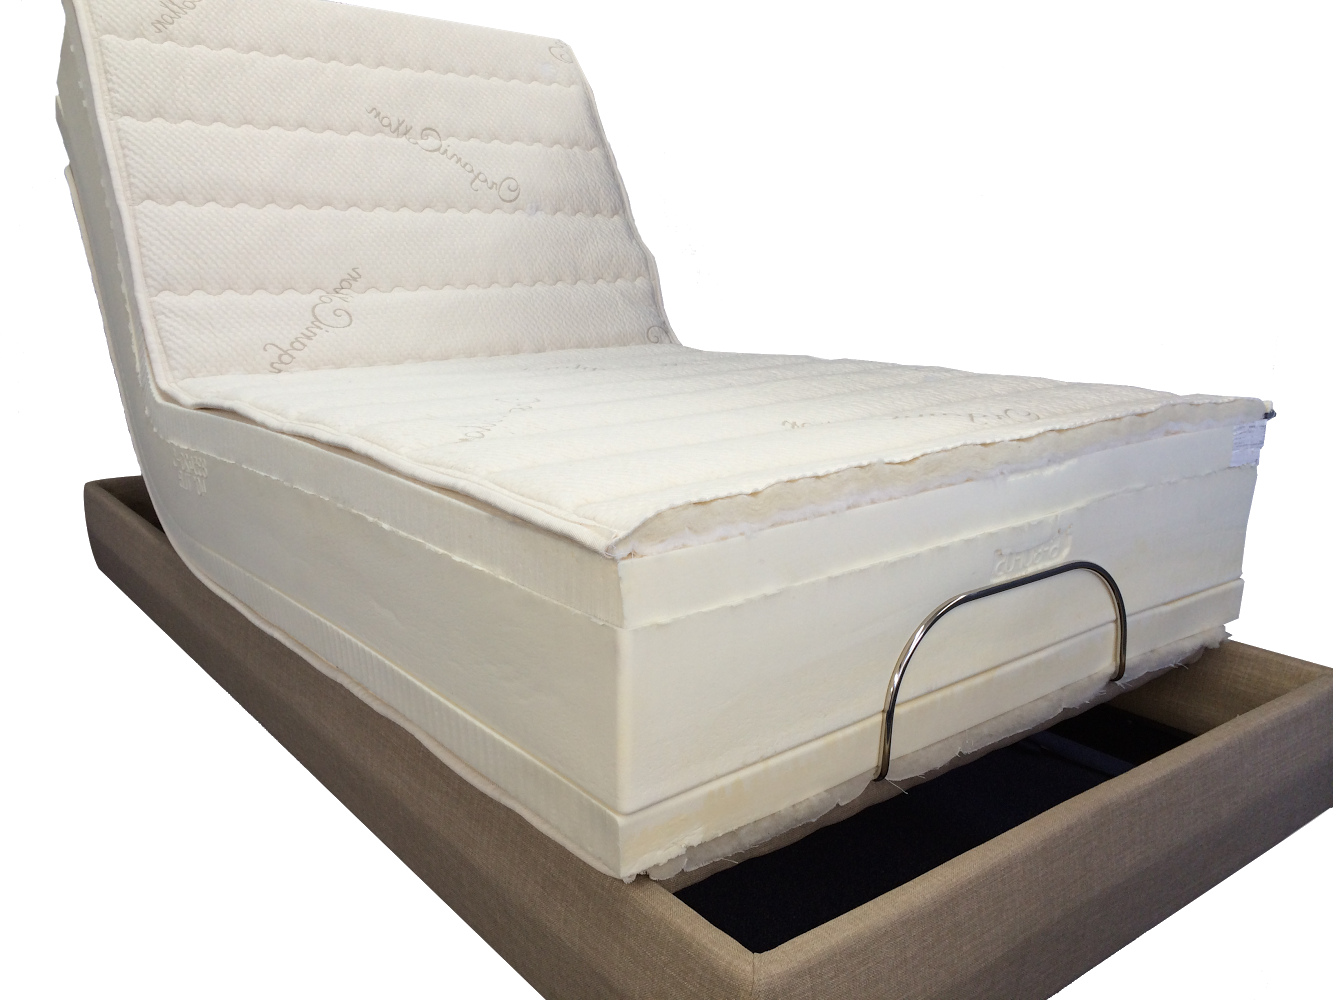 Fresno CA best quality highest ratings Adjustable-Beds reviews consumer reports electric adjustablebeds